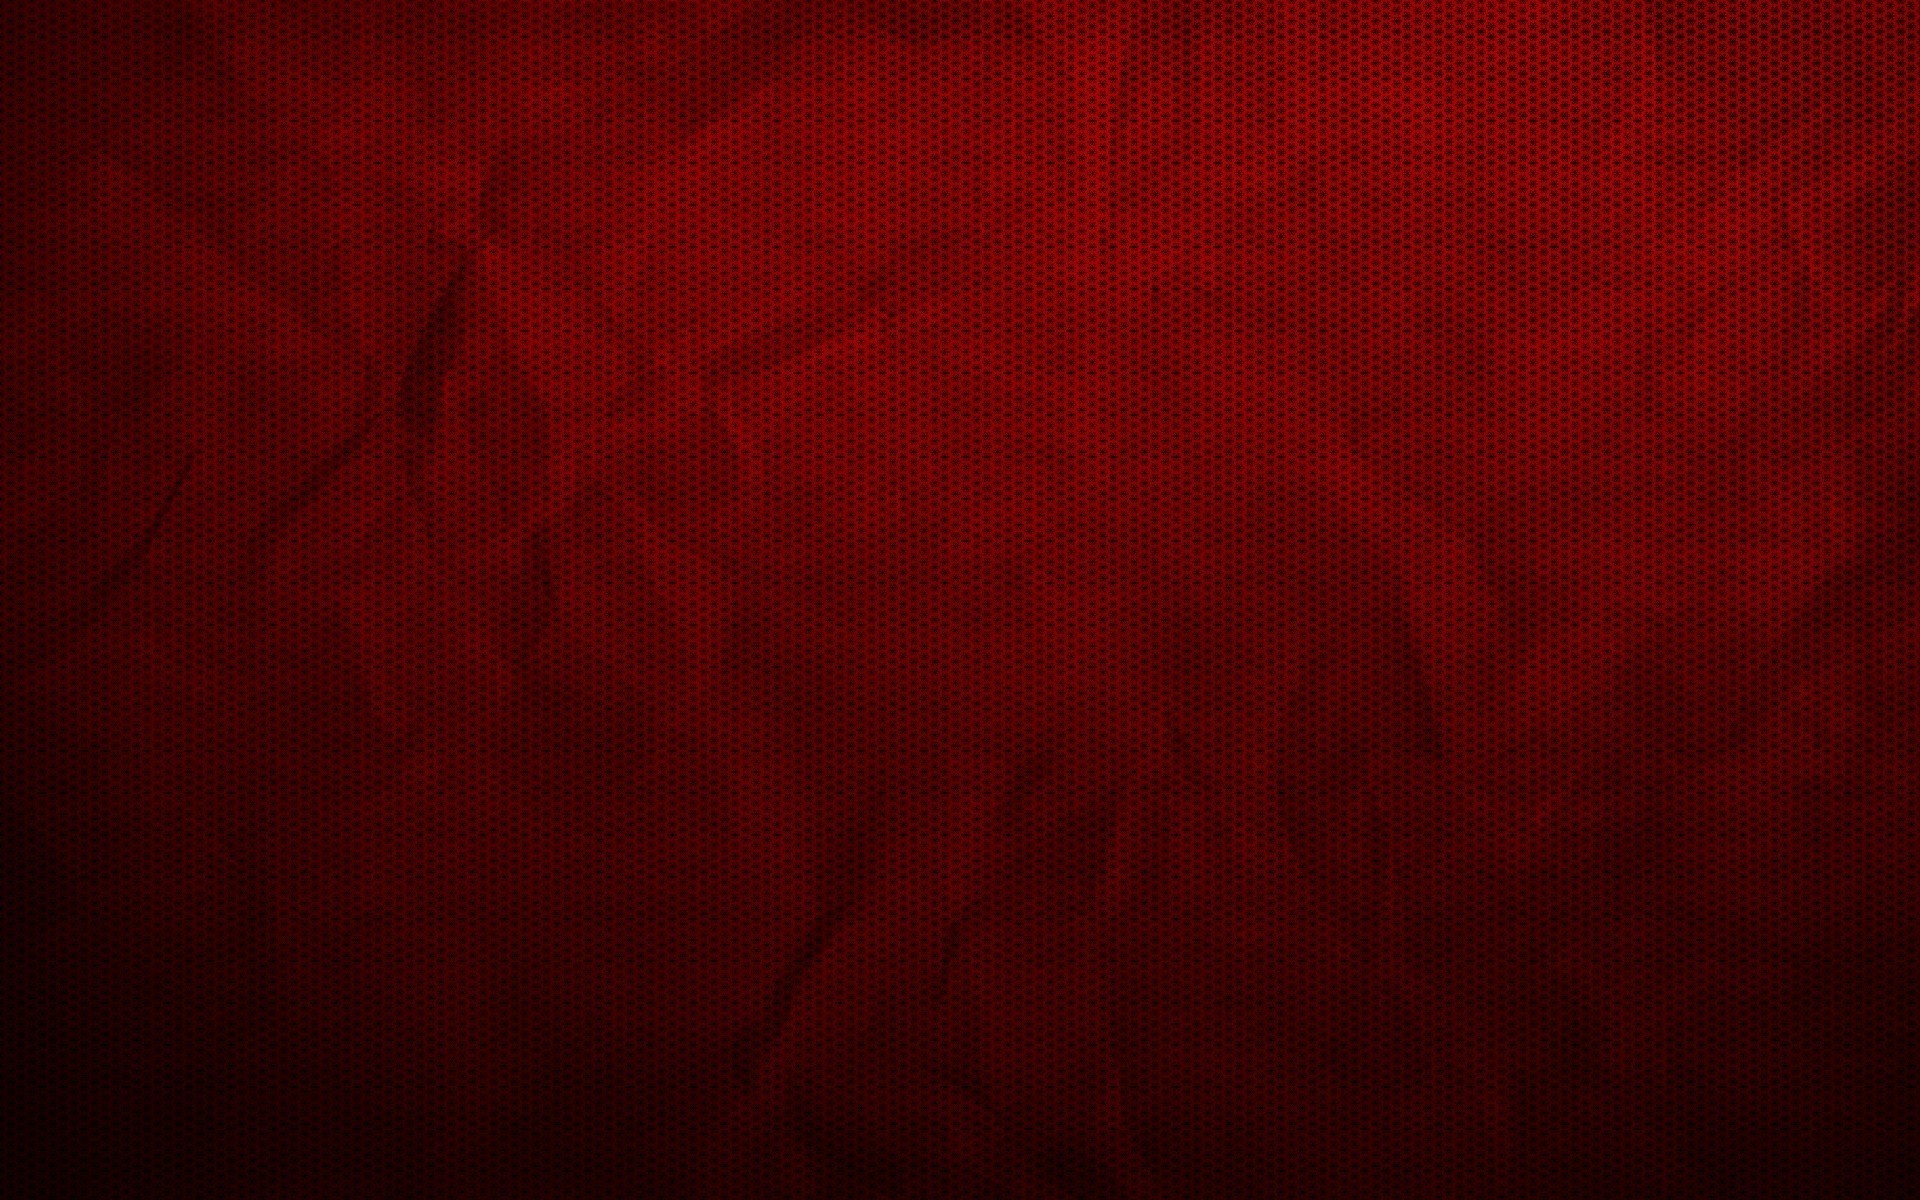 Marun dark red color plain background hd wallpapers gallery